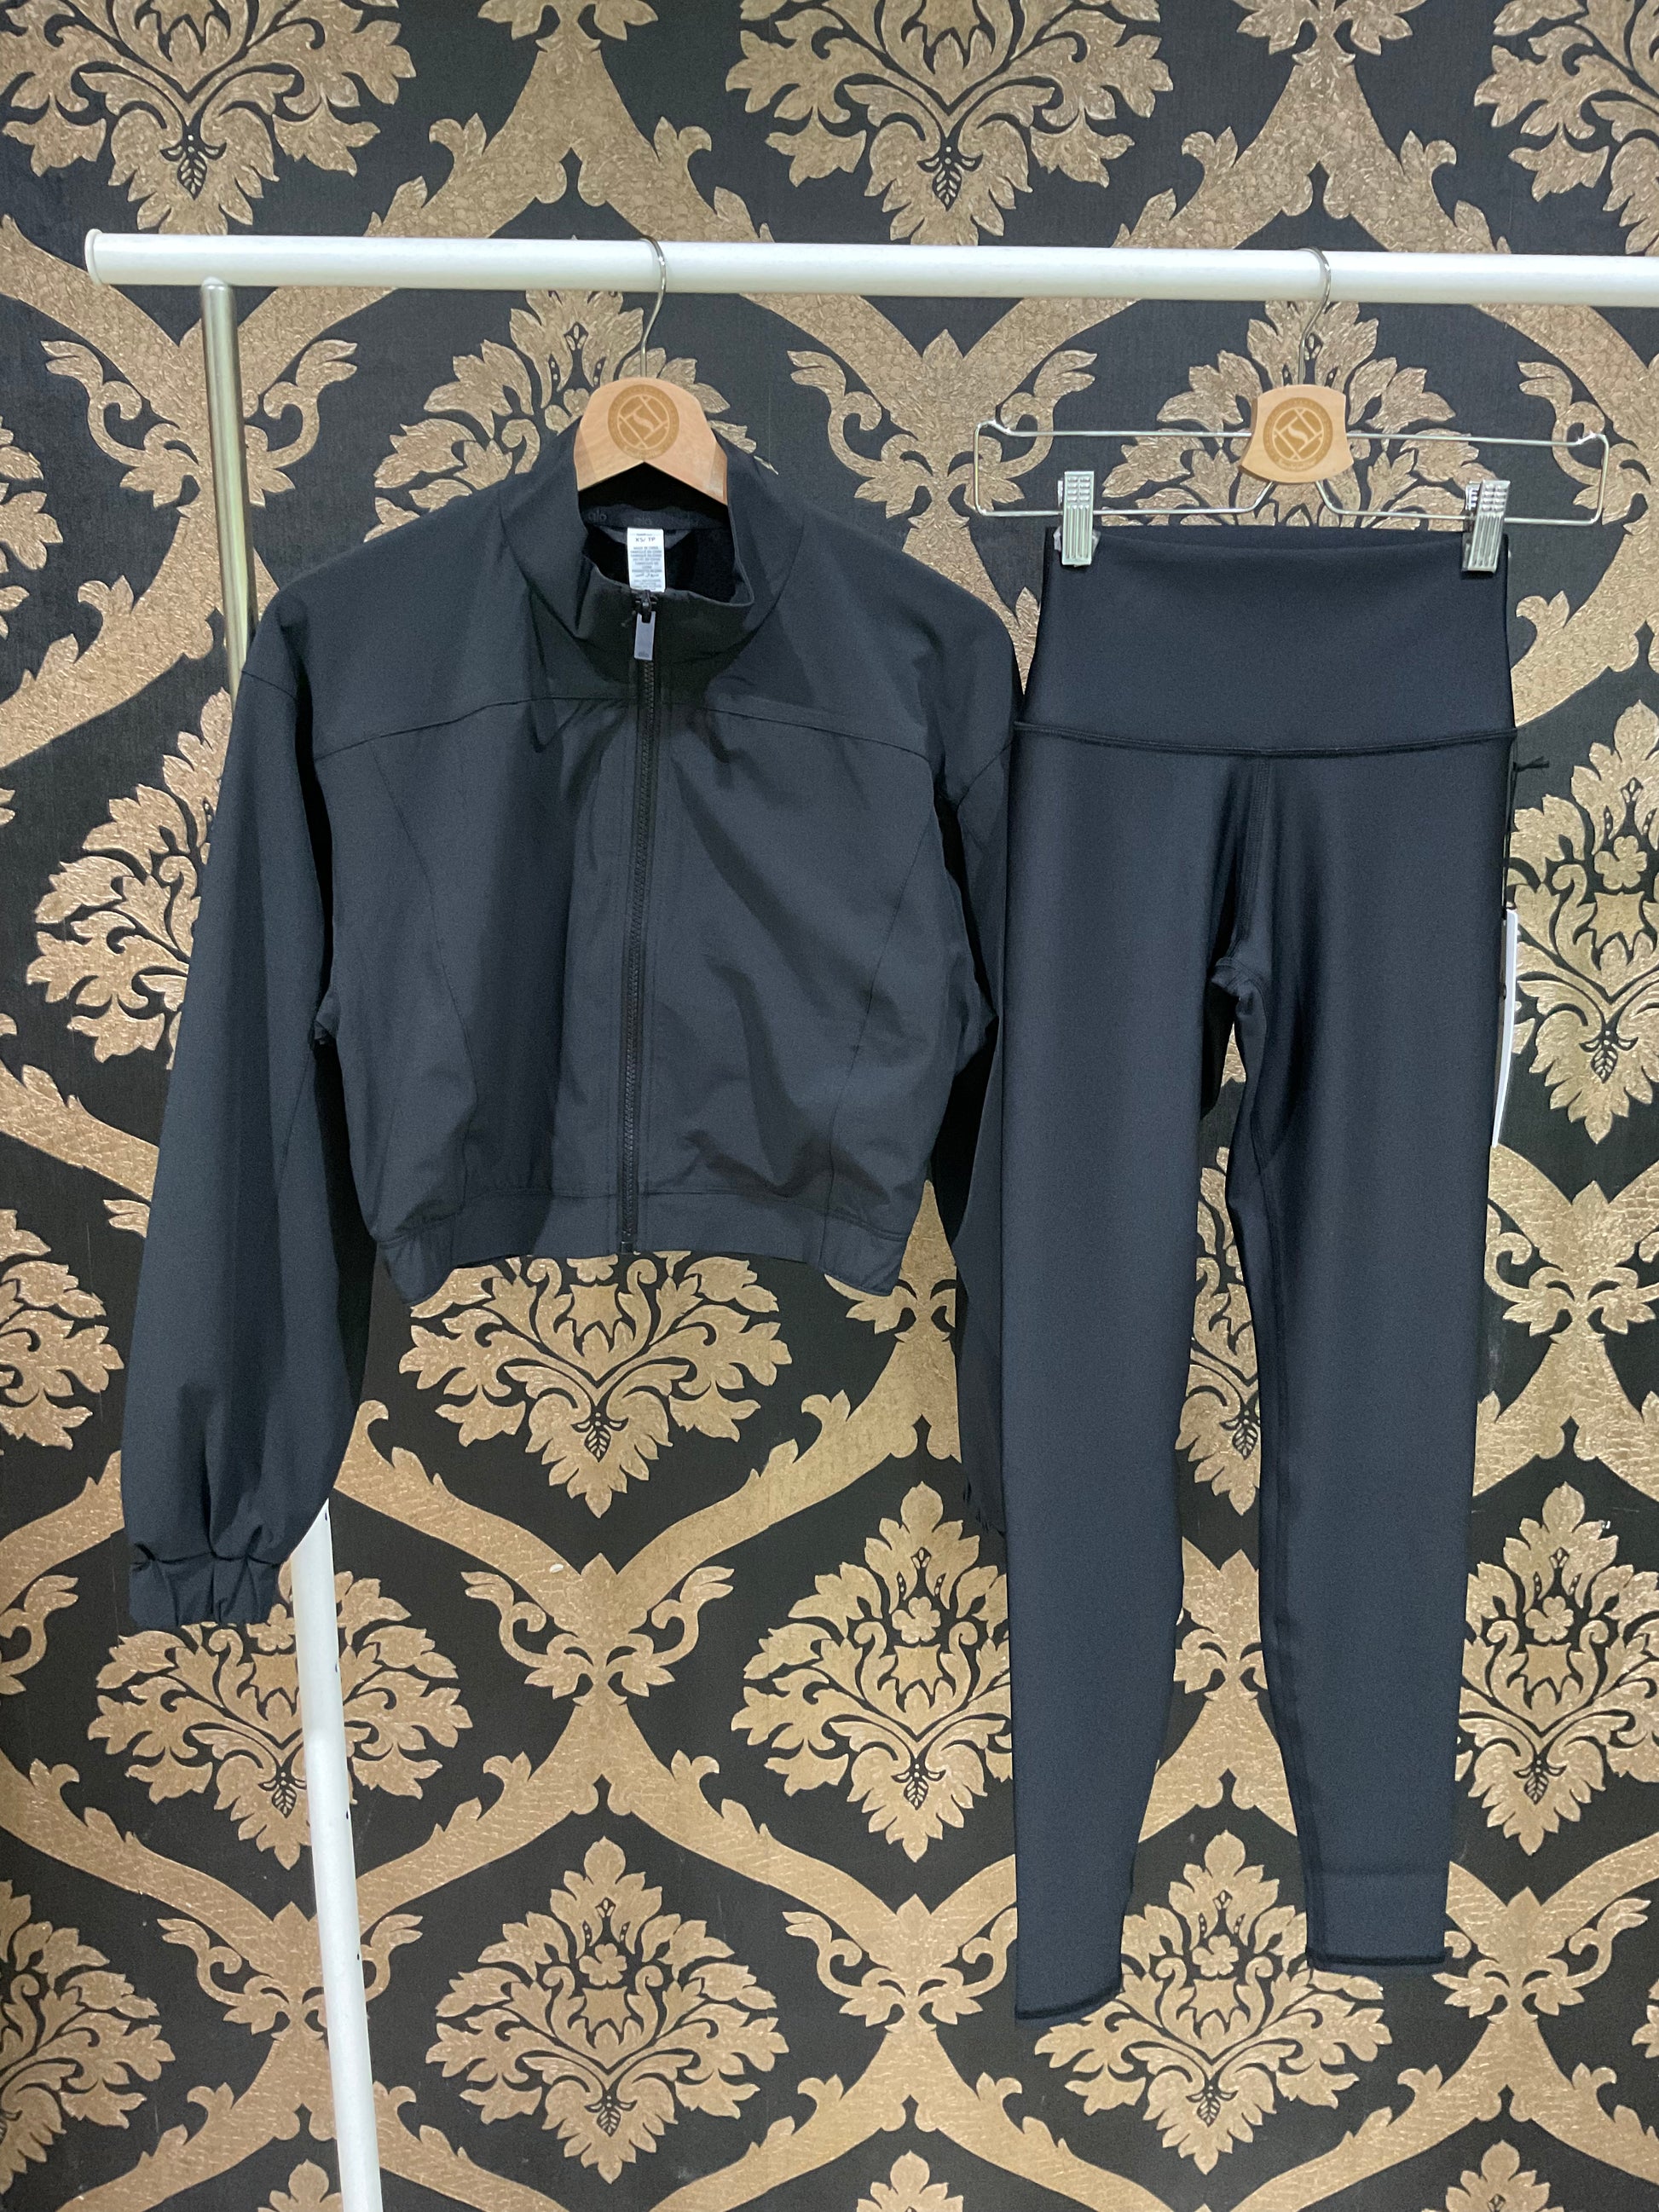 Alo Yoga Clubhouse Jacket in Black